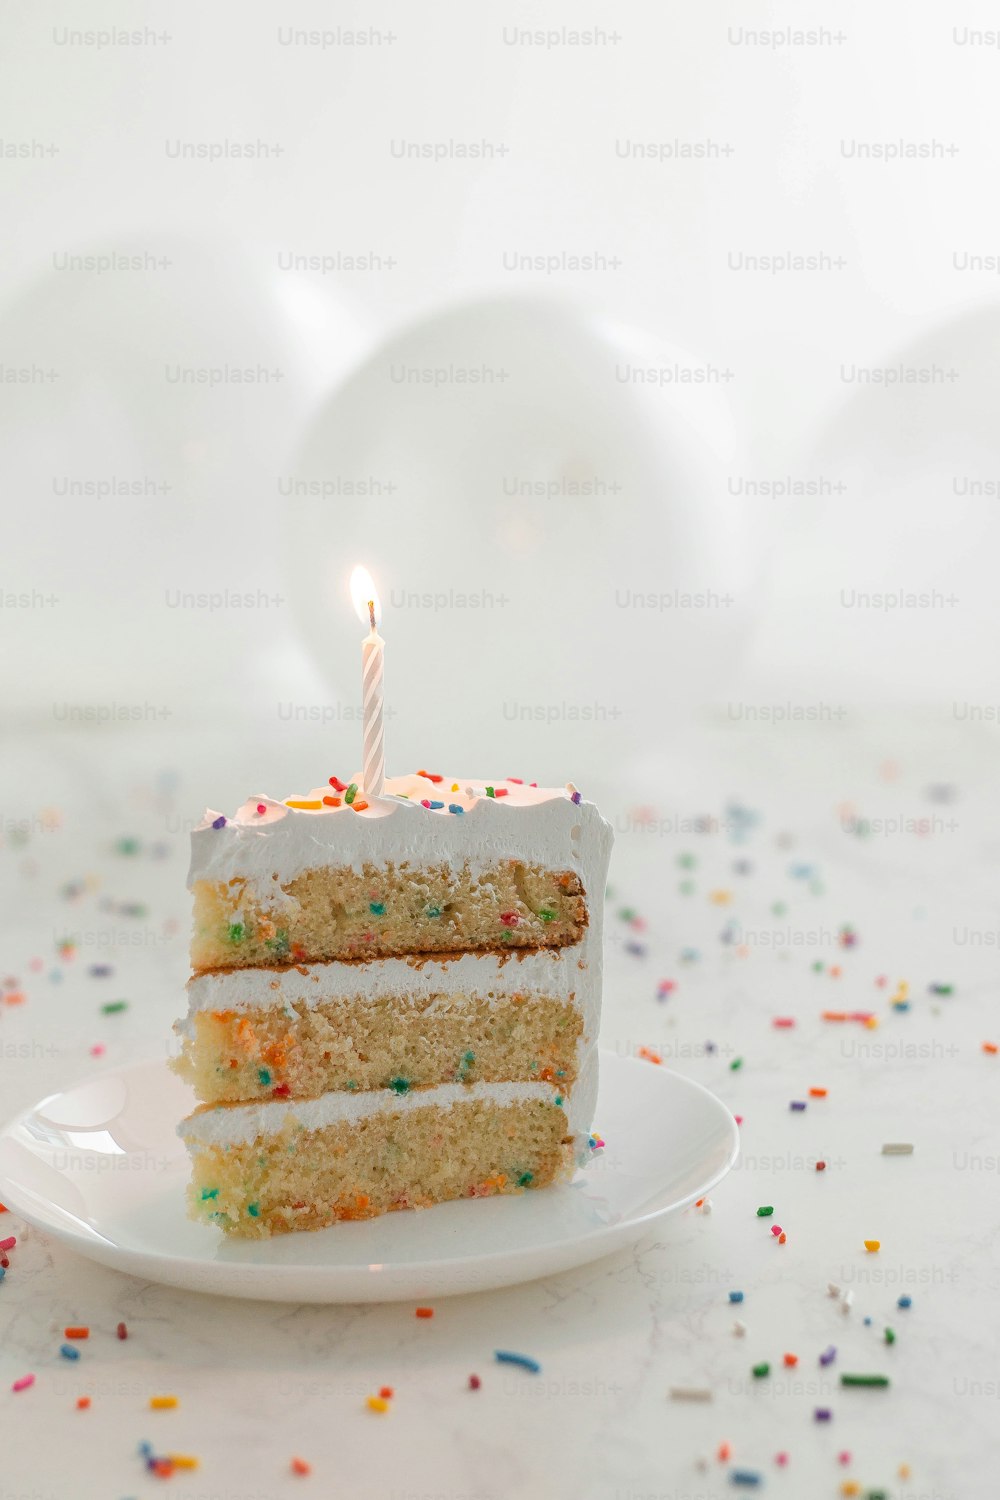 a slice of cake with a lit candle on a plate